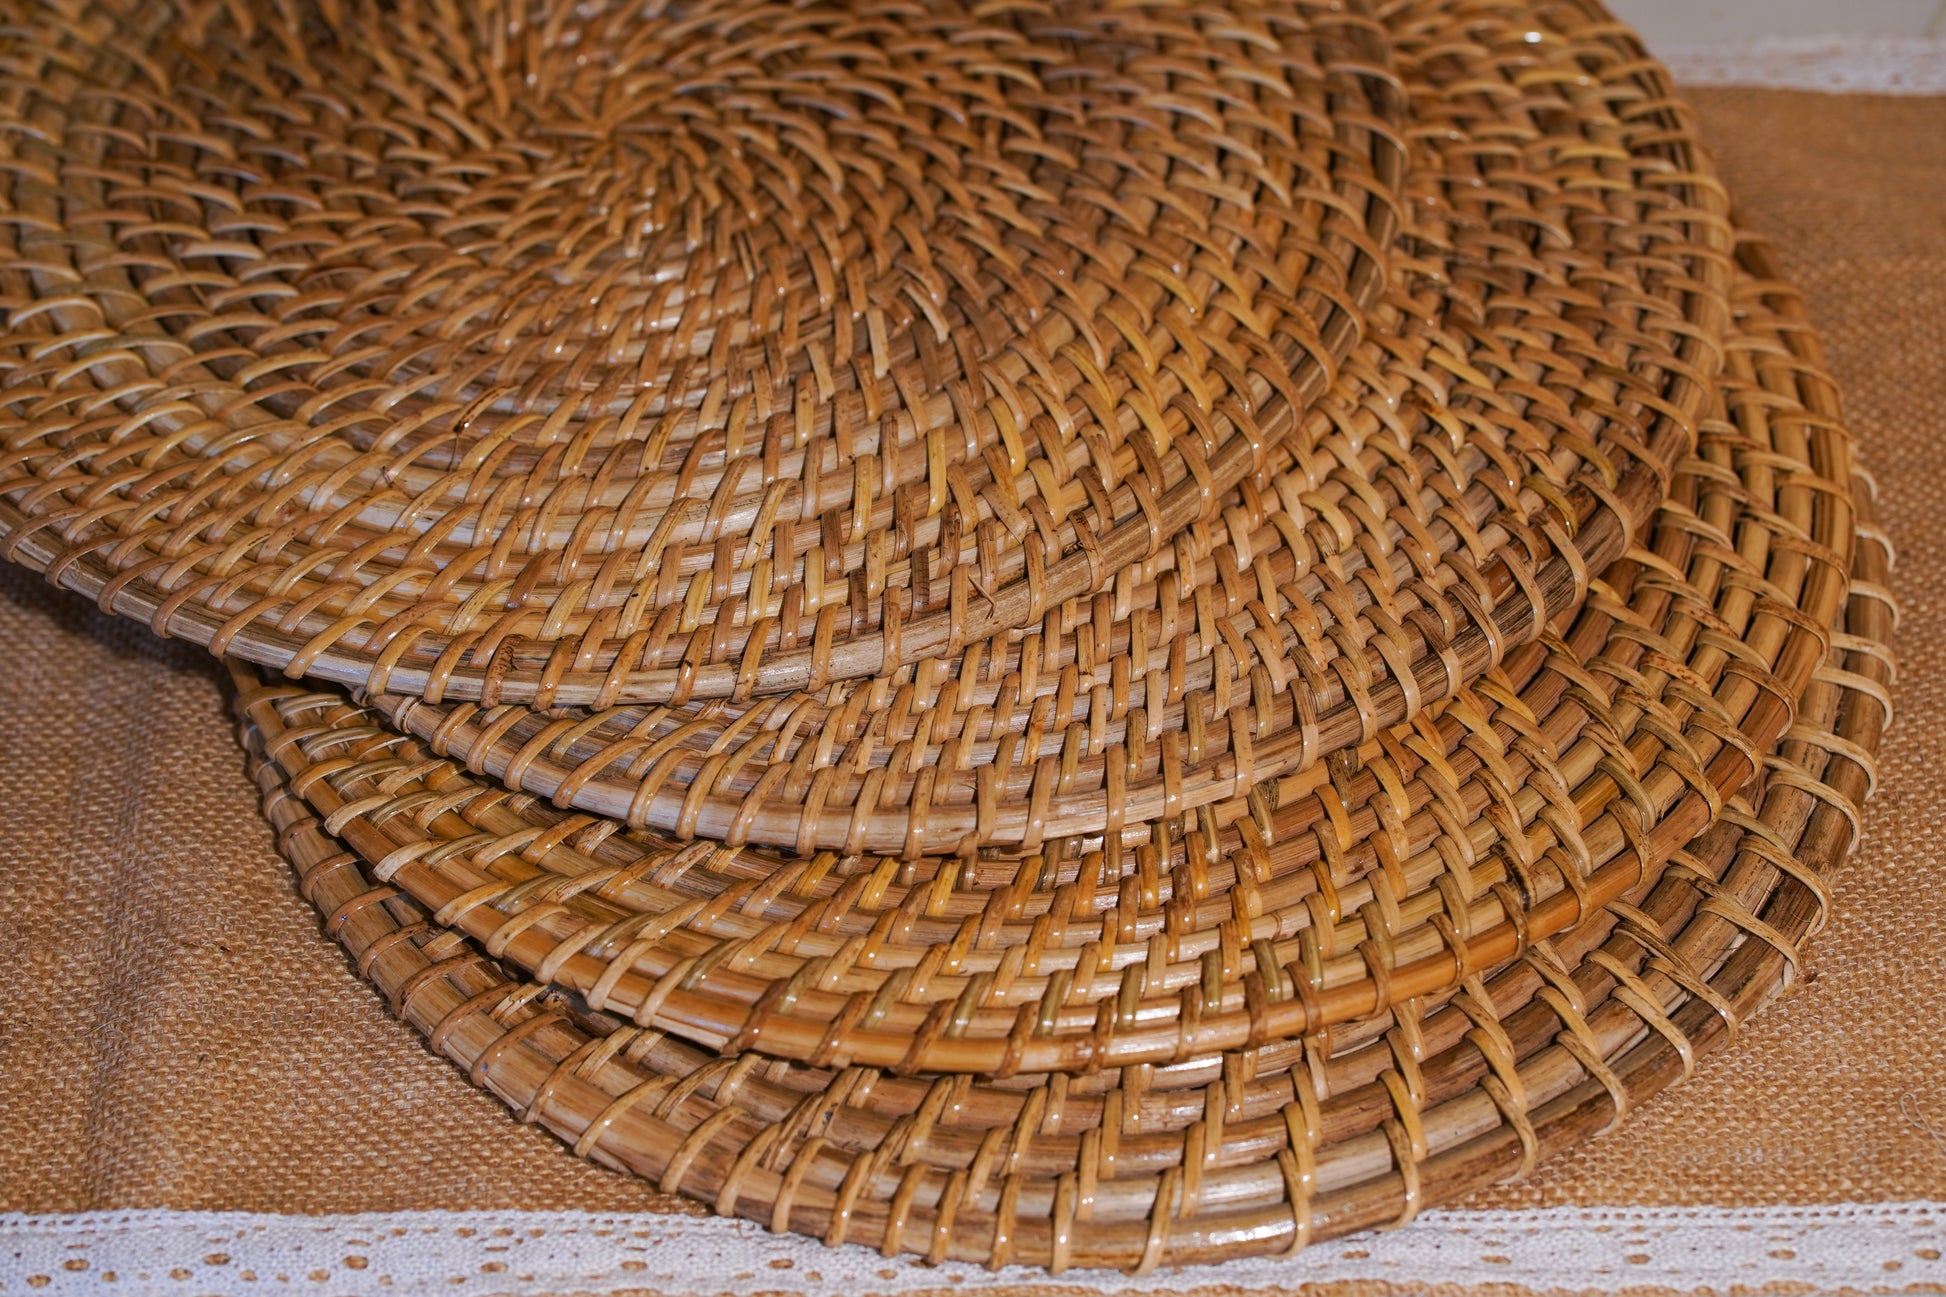  Artisanal tableware, Cane woven round placemats, Charm for dining experience, Dining table décor, Eco-friendly dining accessories, Handcrafted cane placemats, Hand-made dining placemats, Natural cane placemats, Round woven placemats, Sustainable cane products, tesu